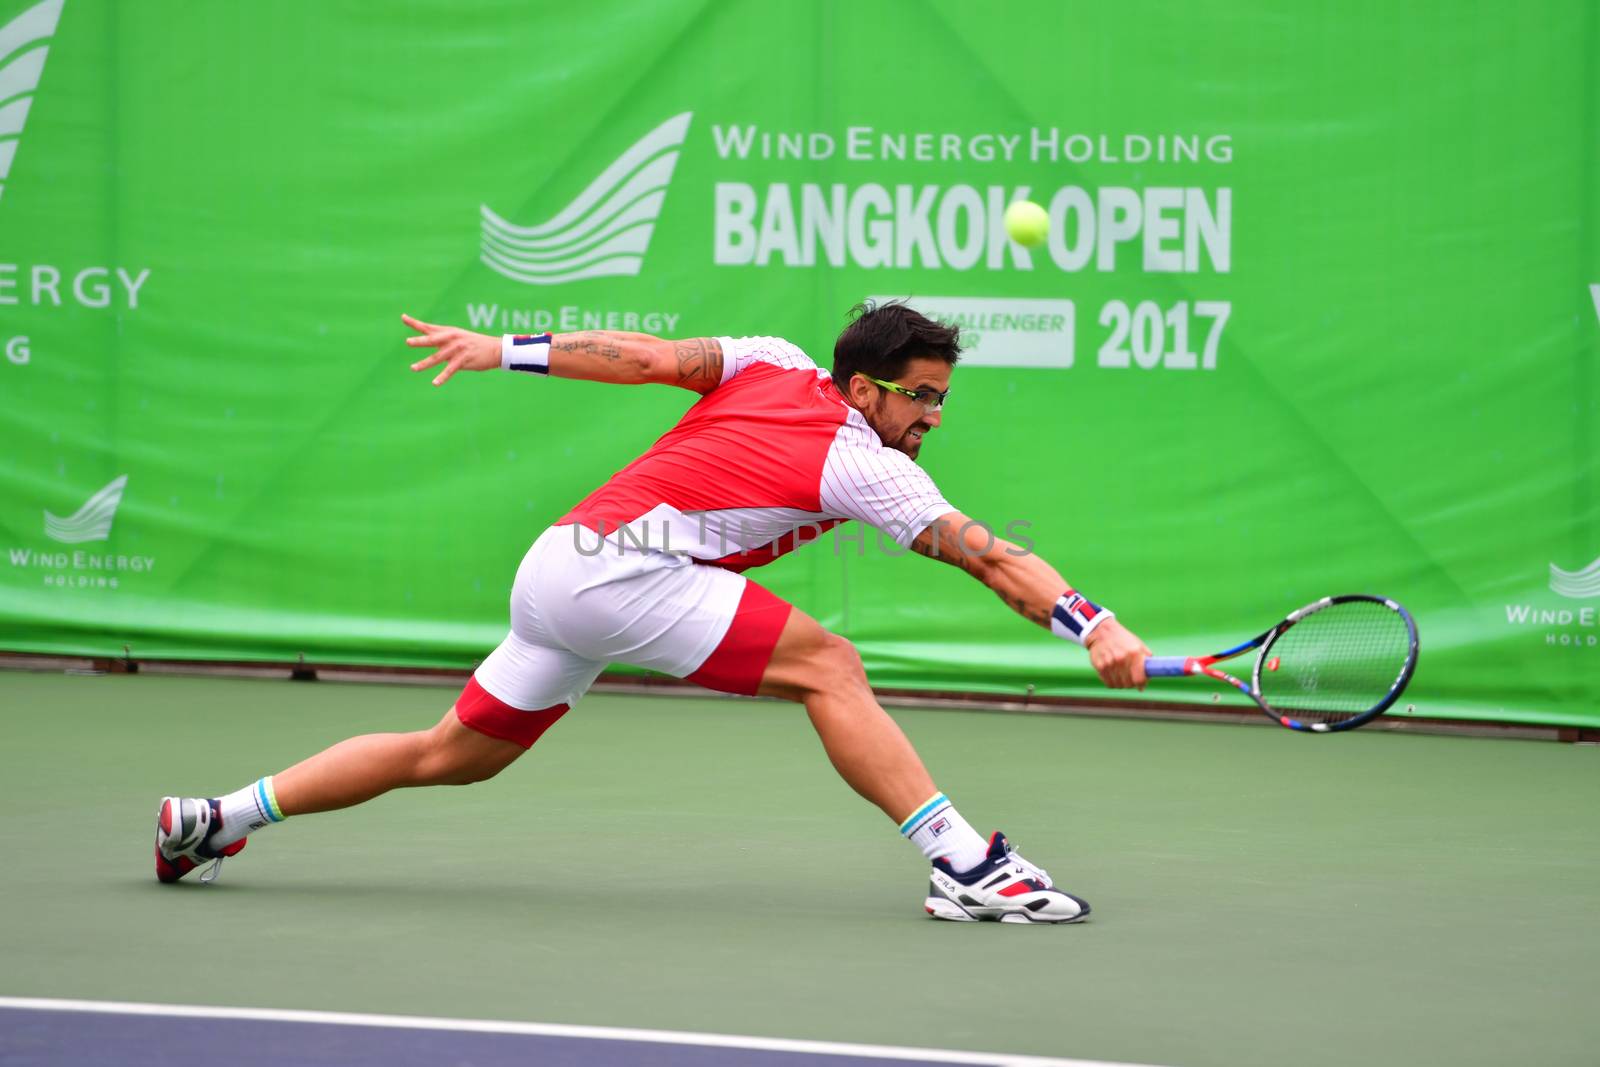 Wind Energy Holding Bangkok Open 2017 by chatchai